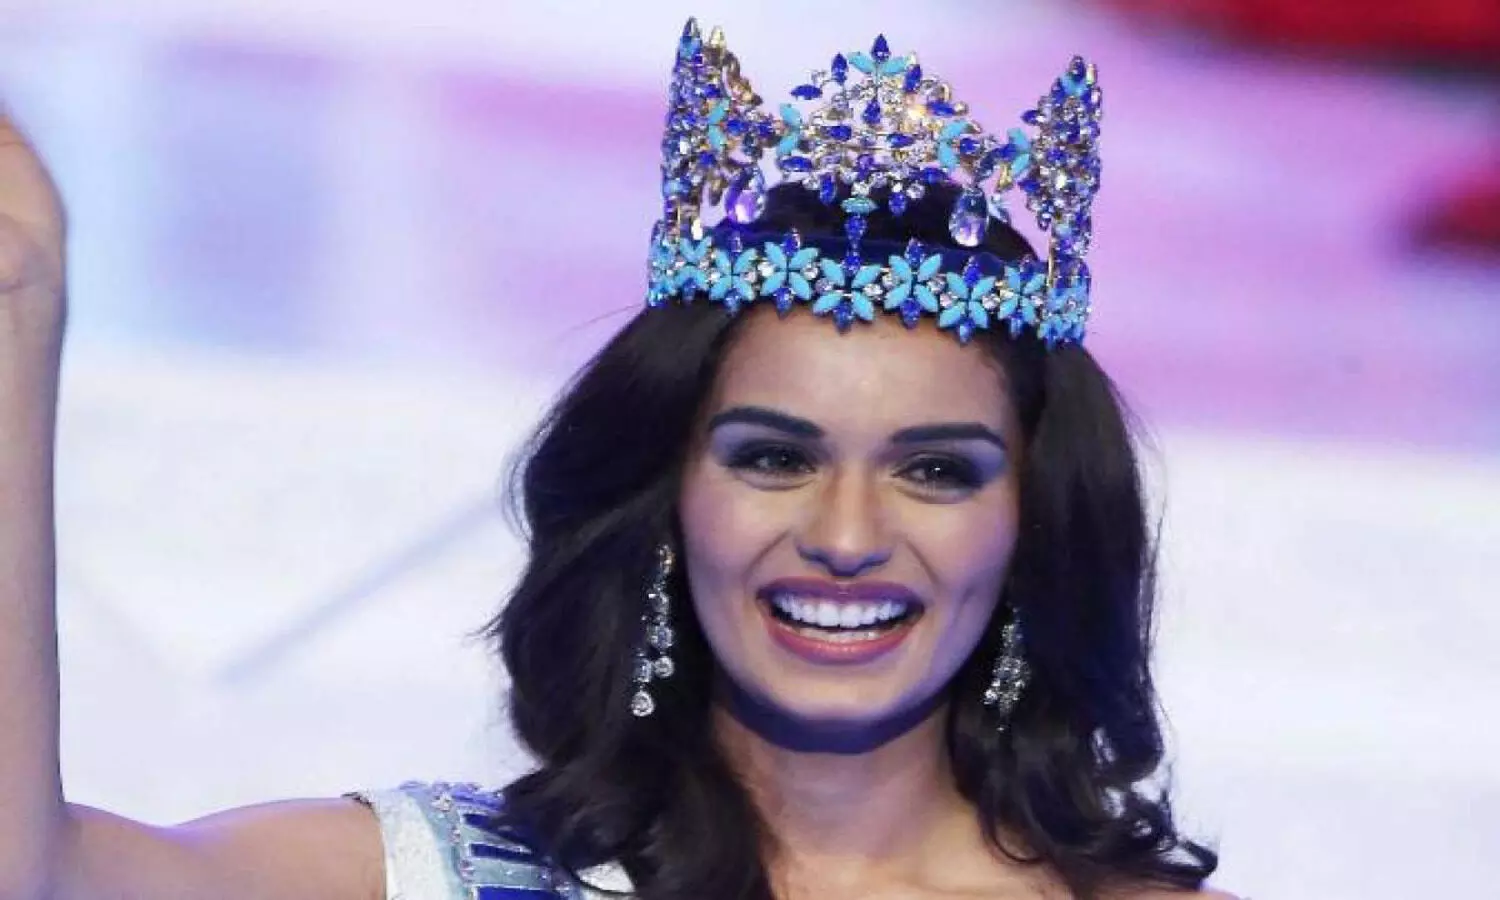 Miss World Beauty Pageant: Here are some interesting facts you need to know